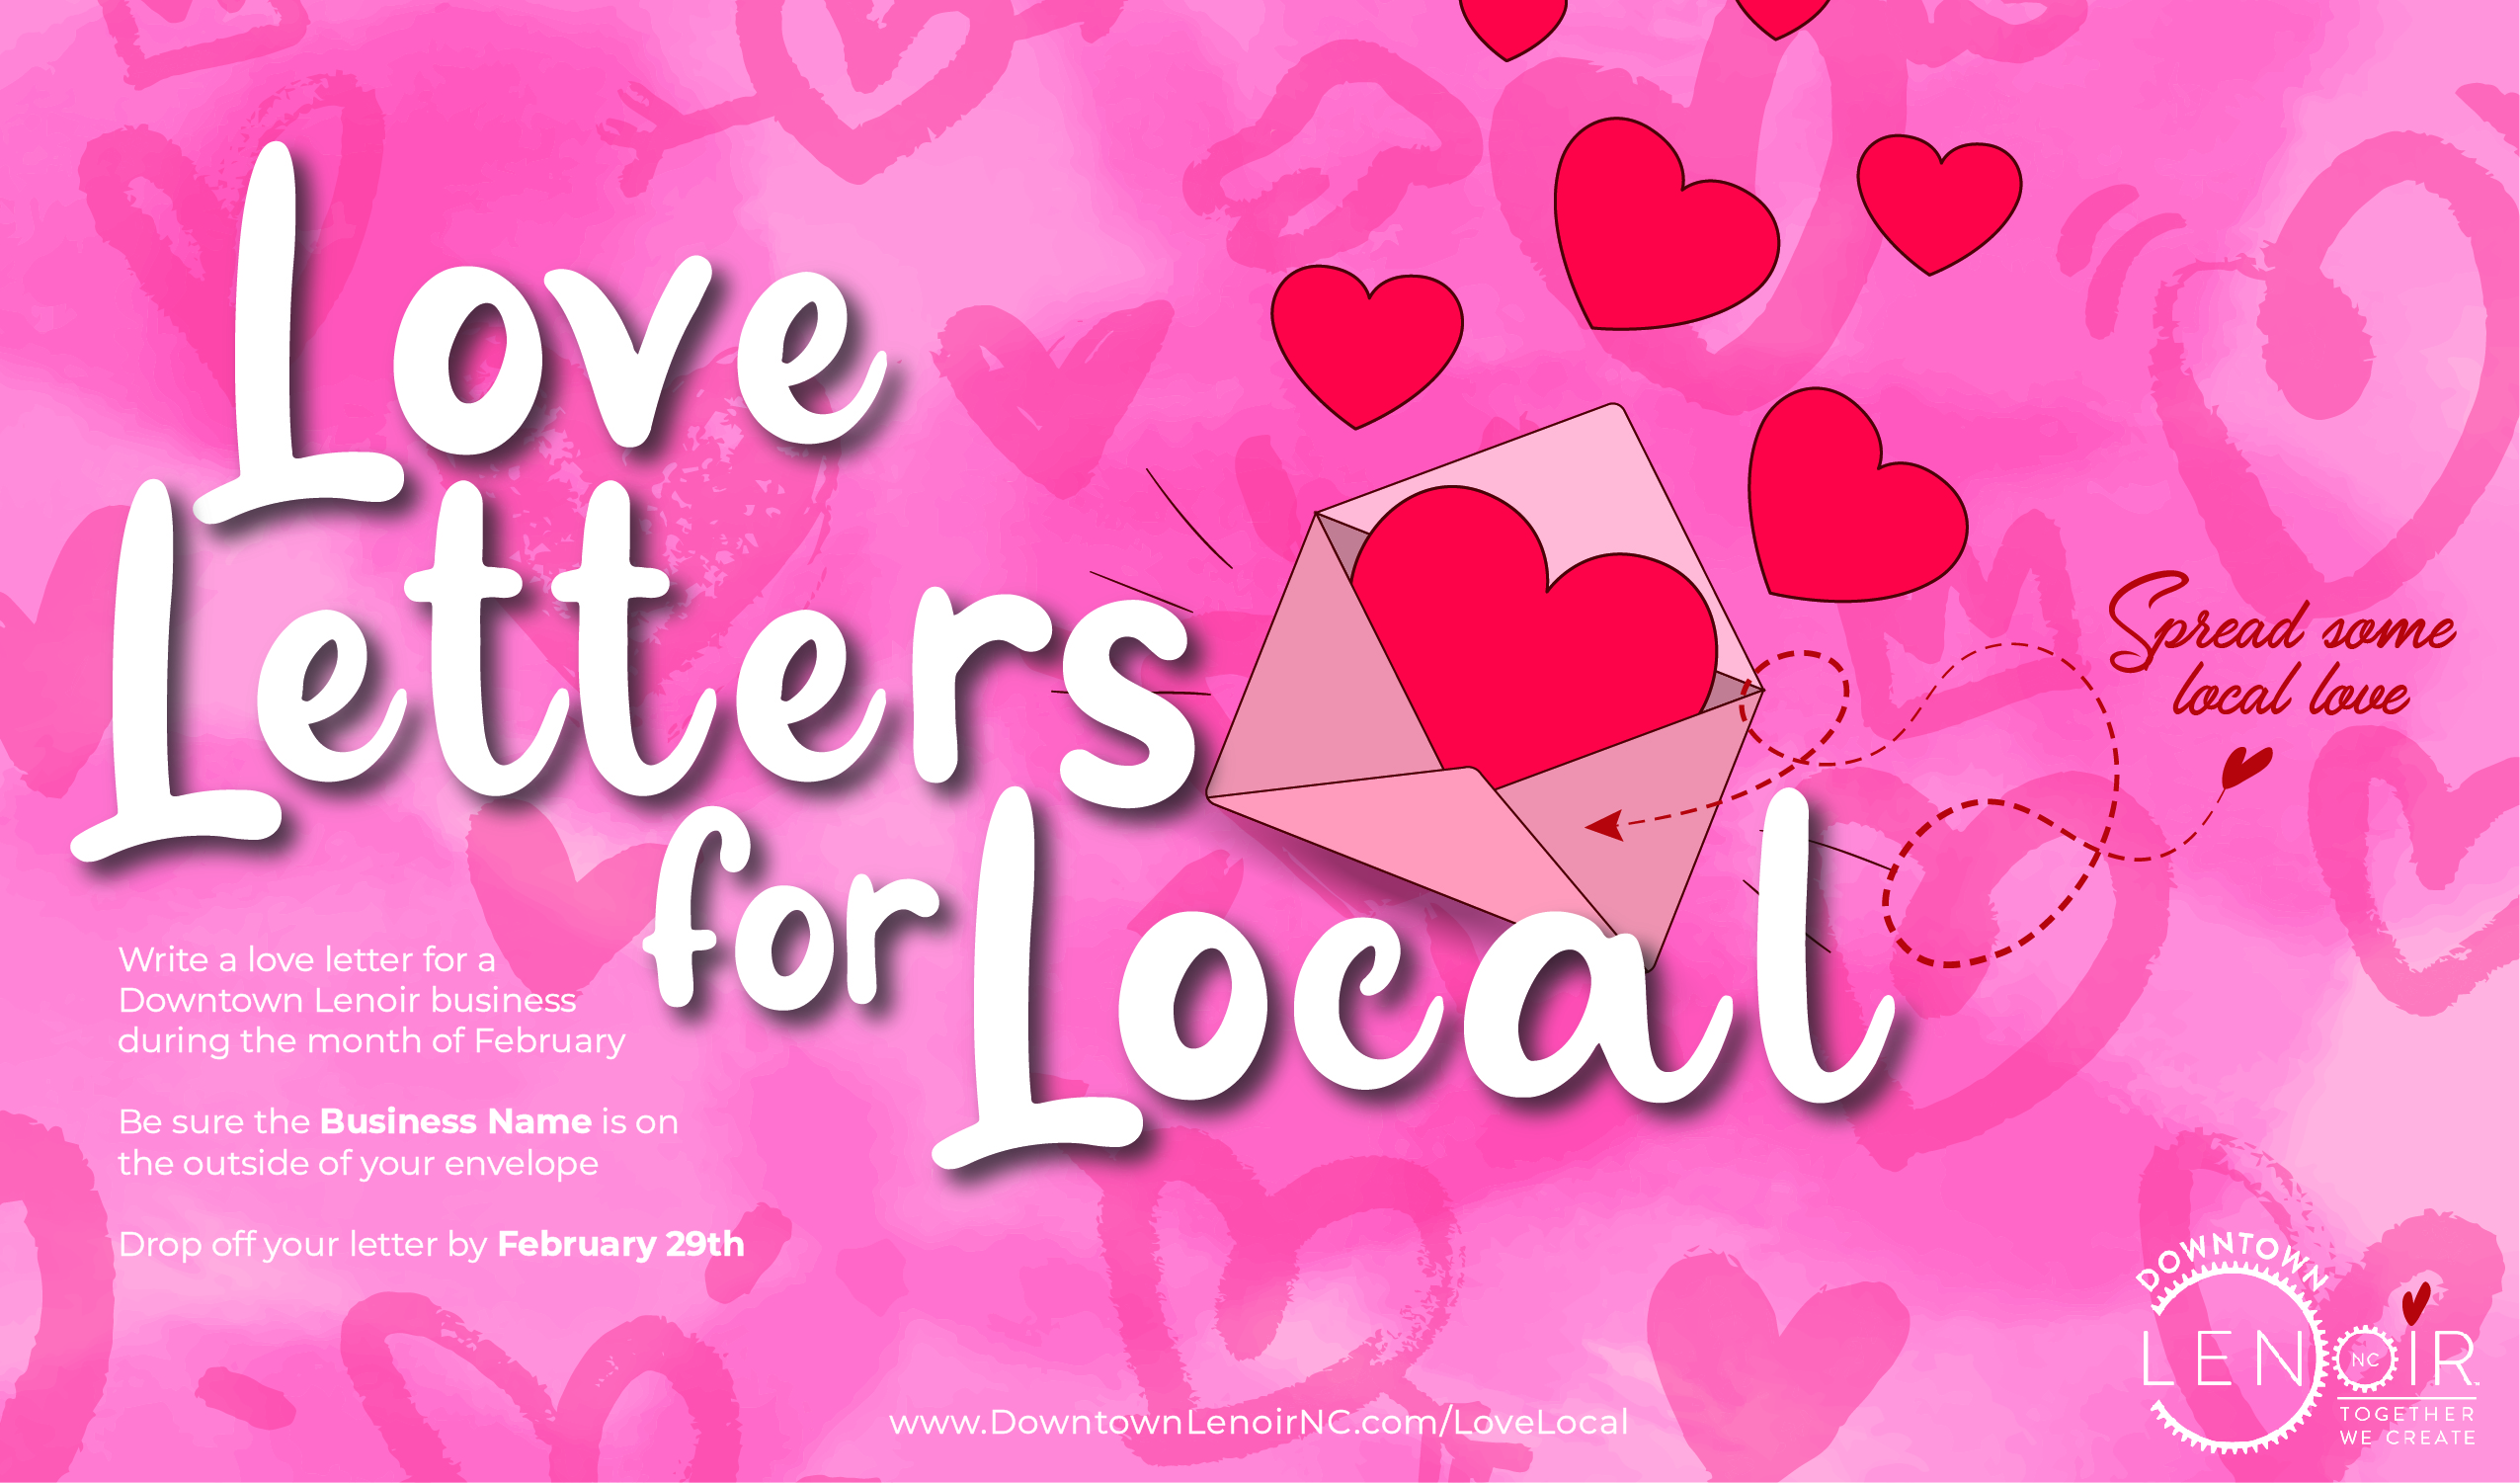 Love Local this February